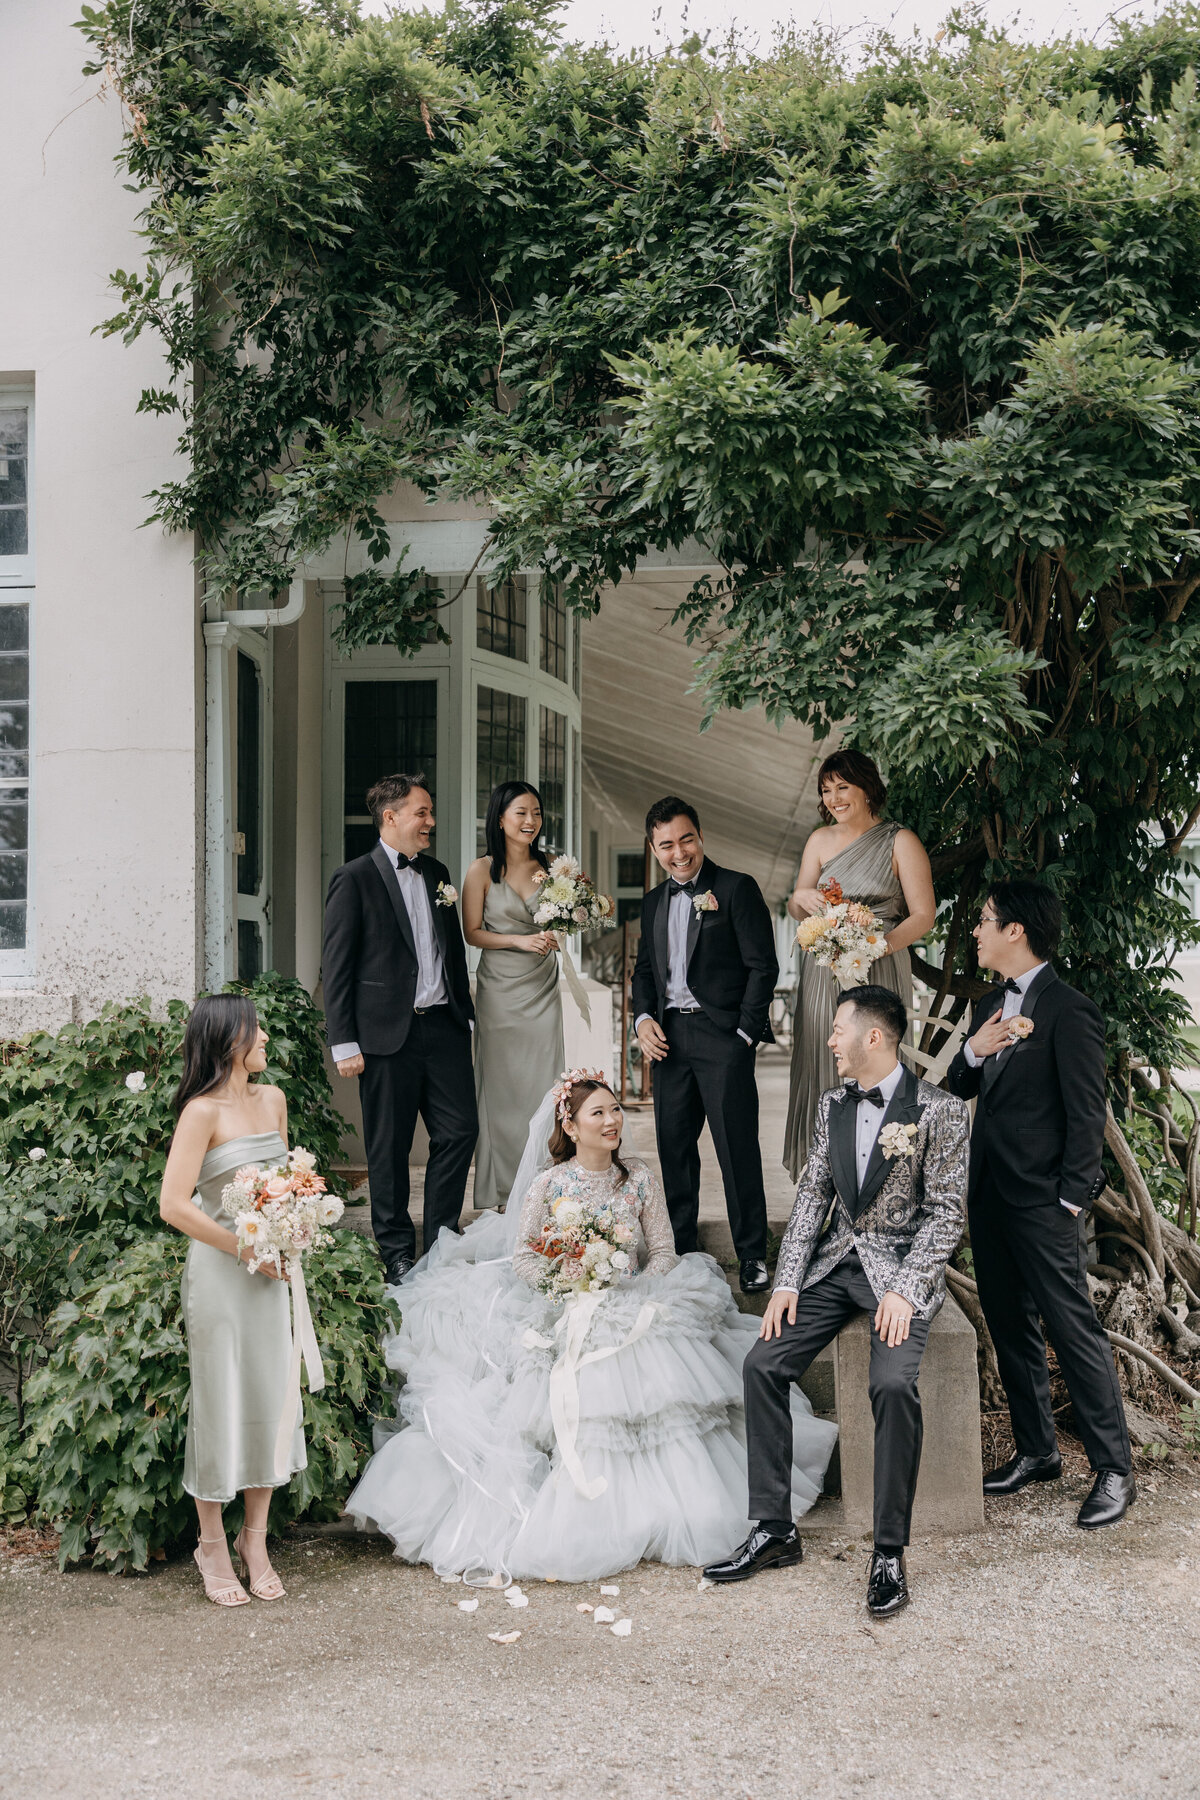 A bride, groom and bridal party with wedding flowers from Estúdyo